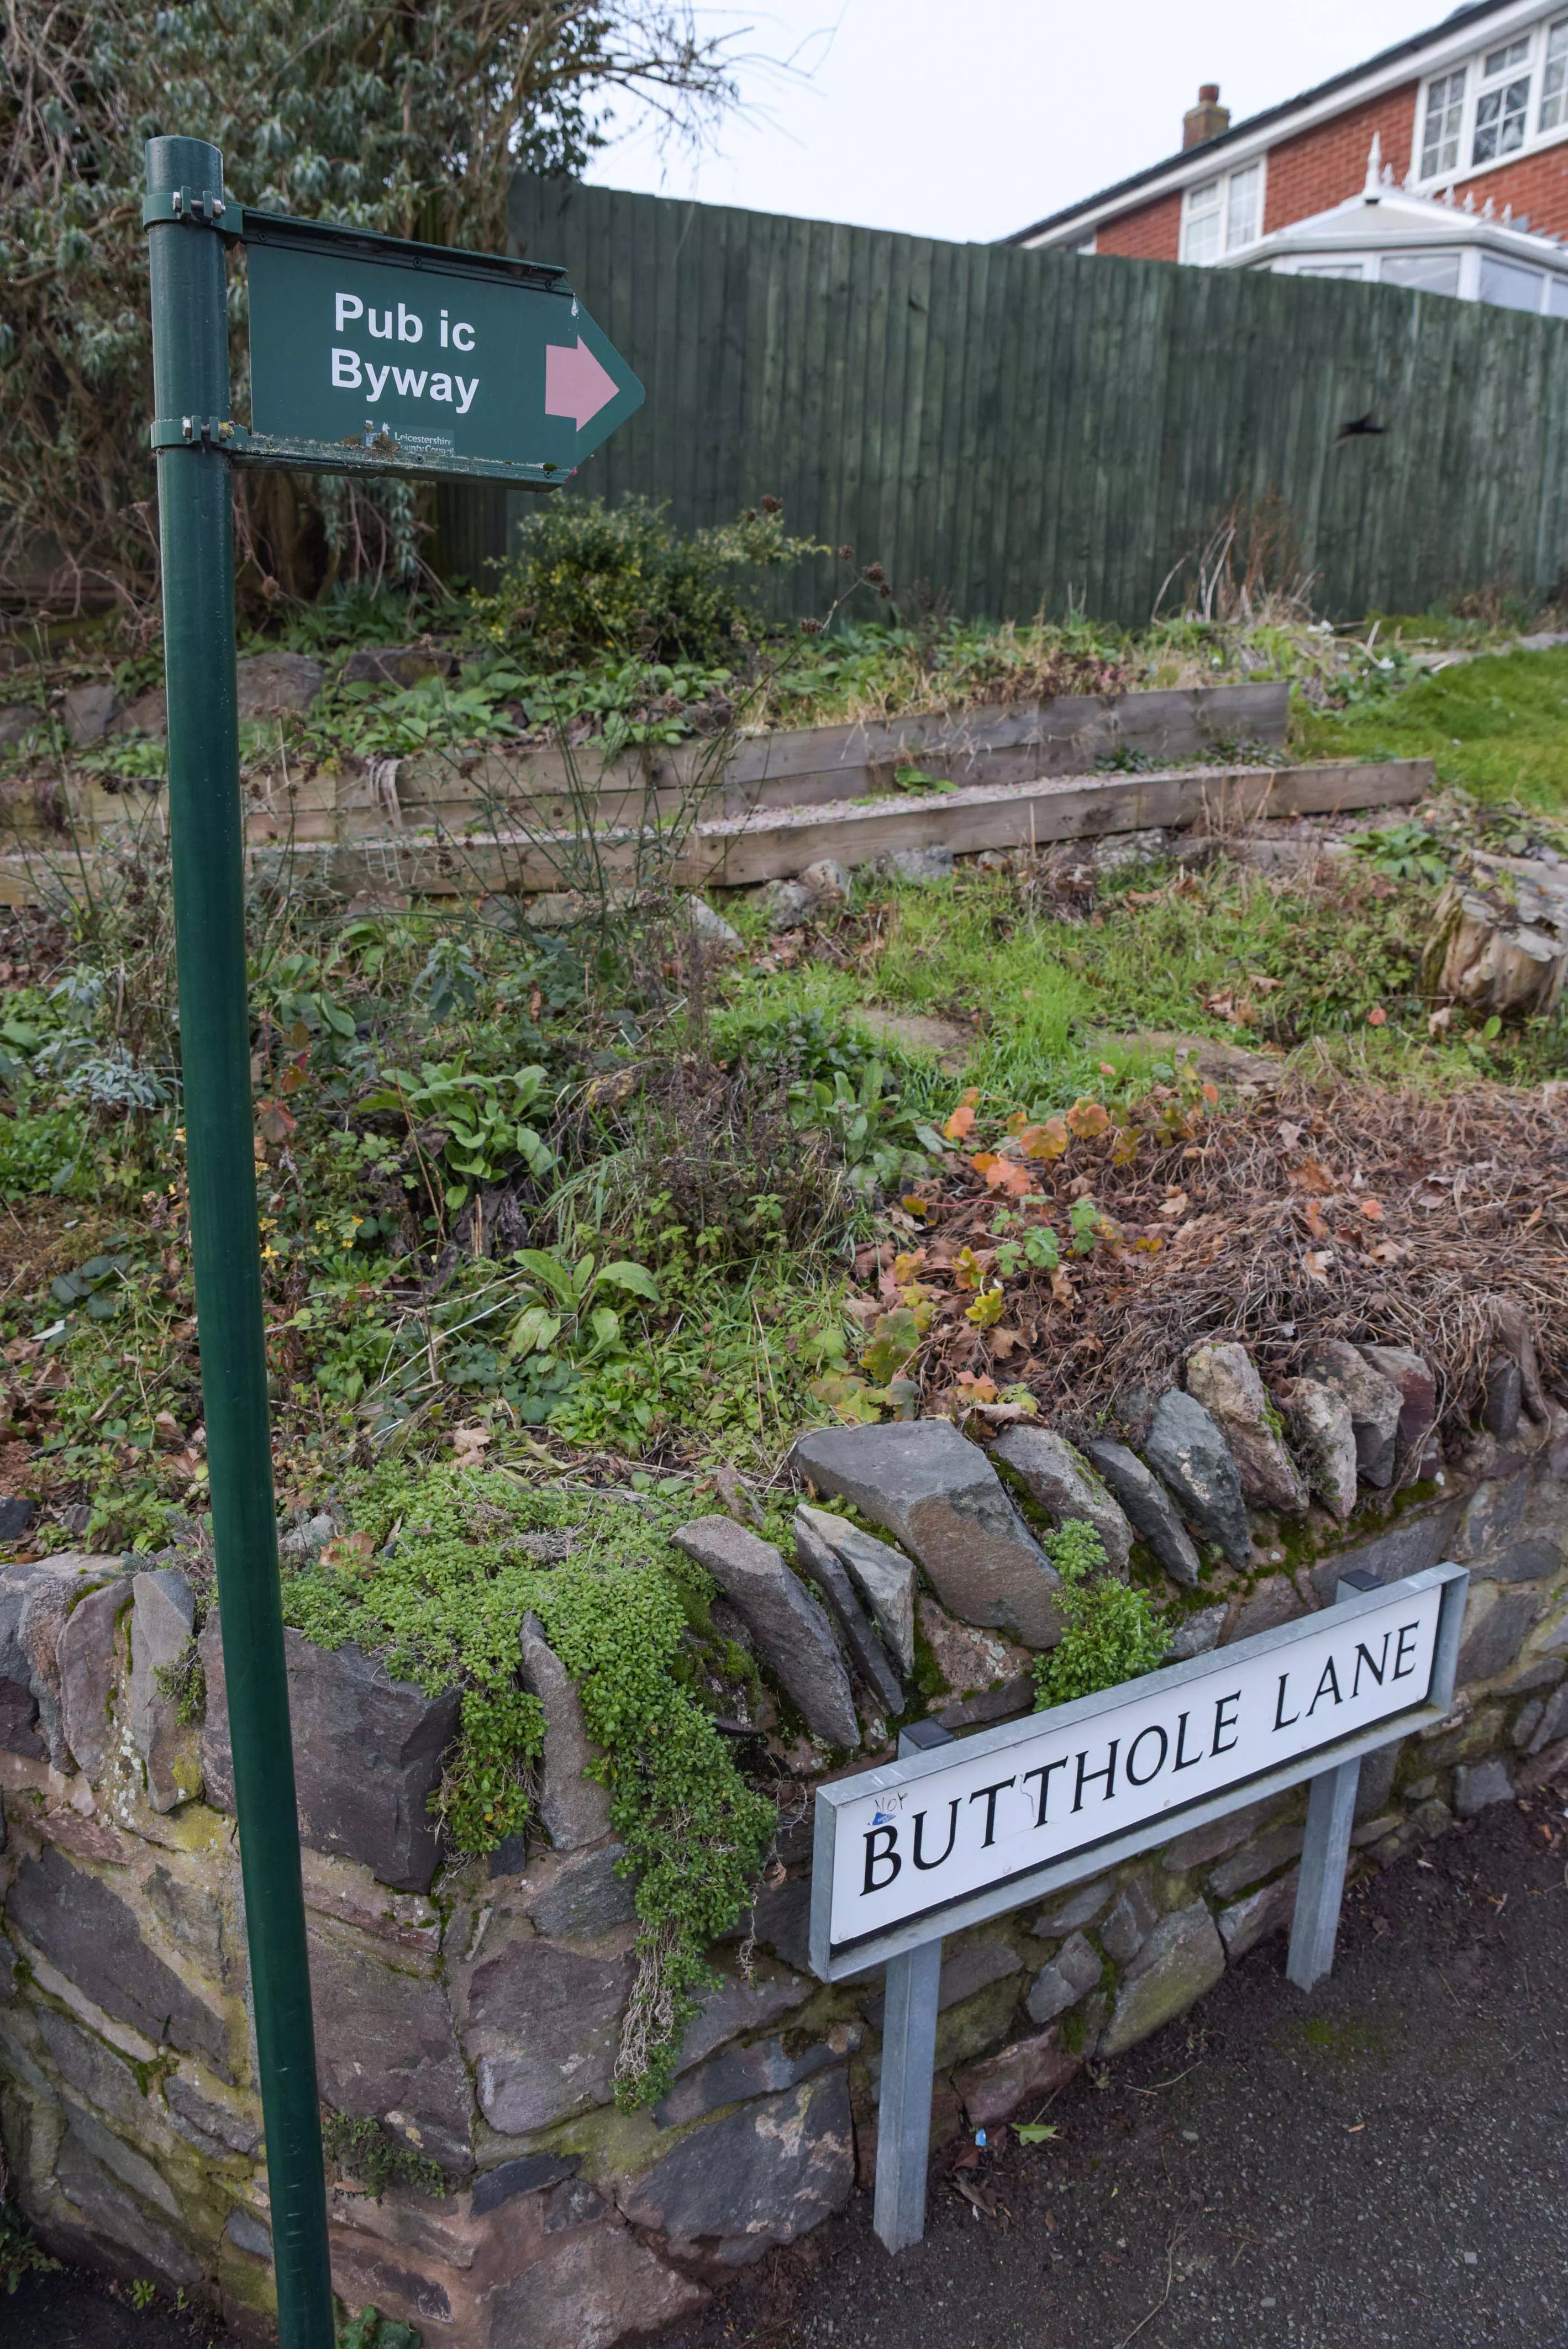 Pranksters have also removed the L from 'Public Byway' which now reads Pubic Byway.